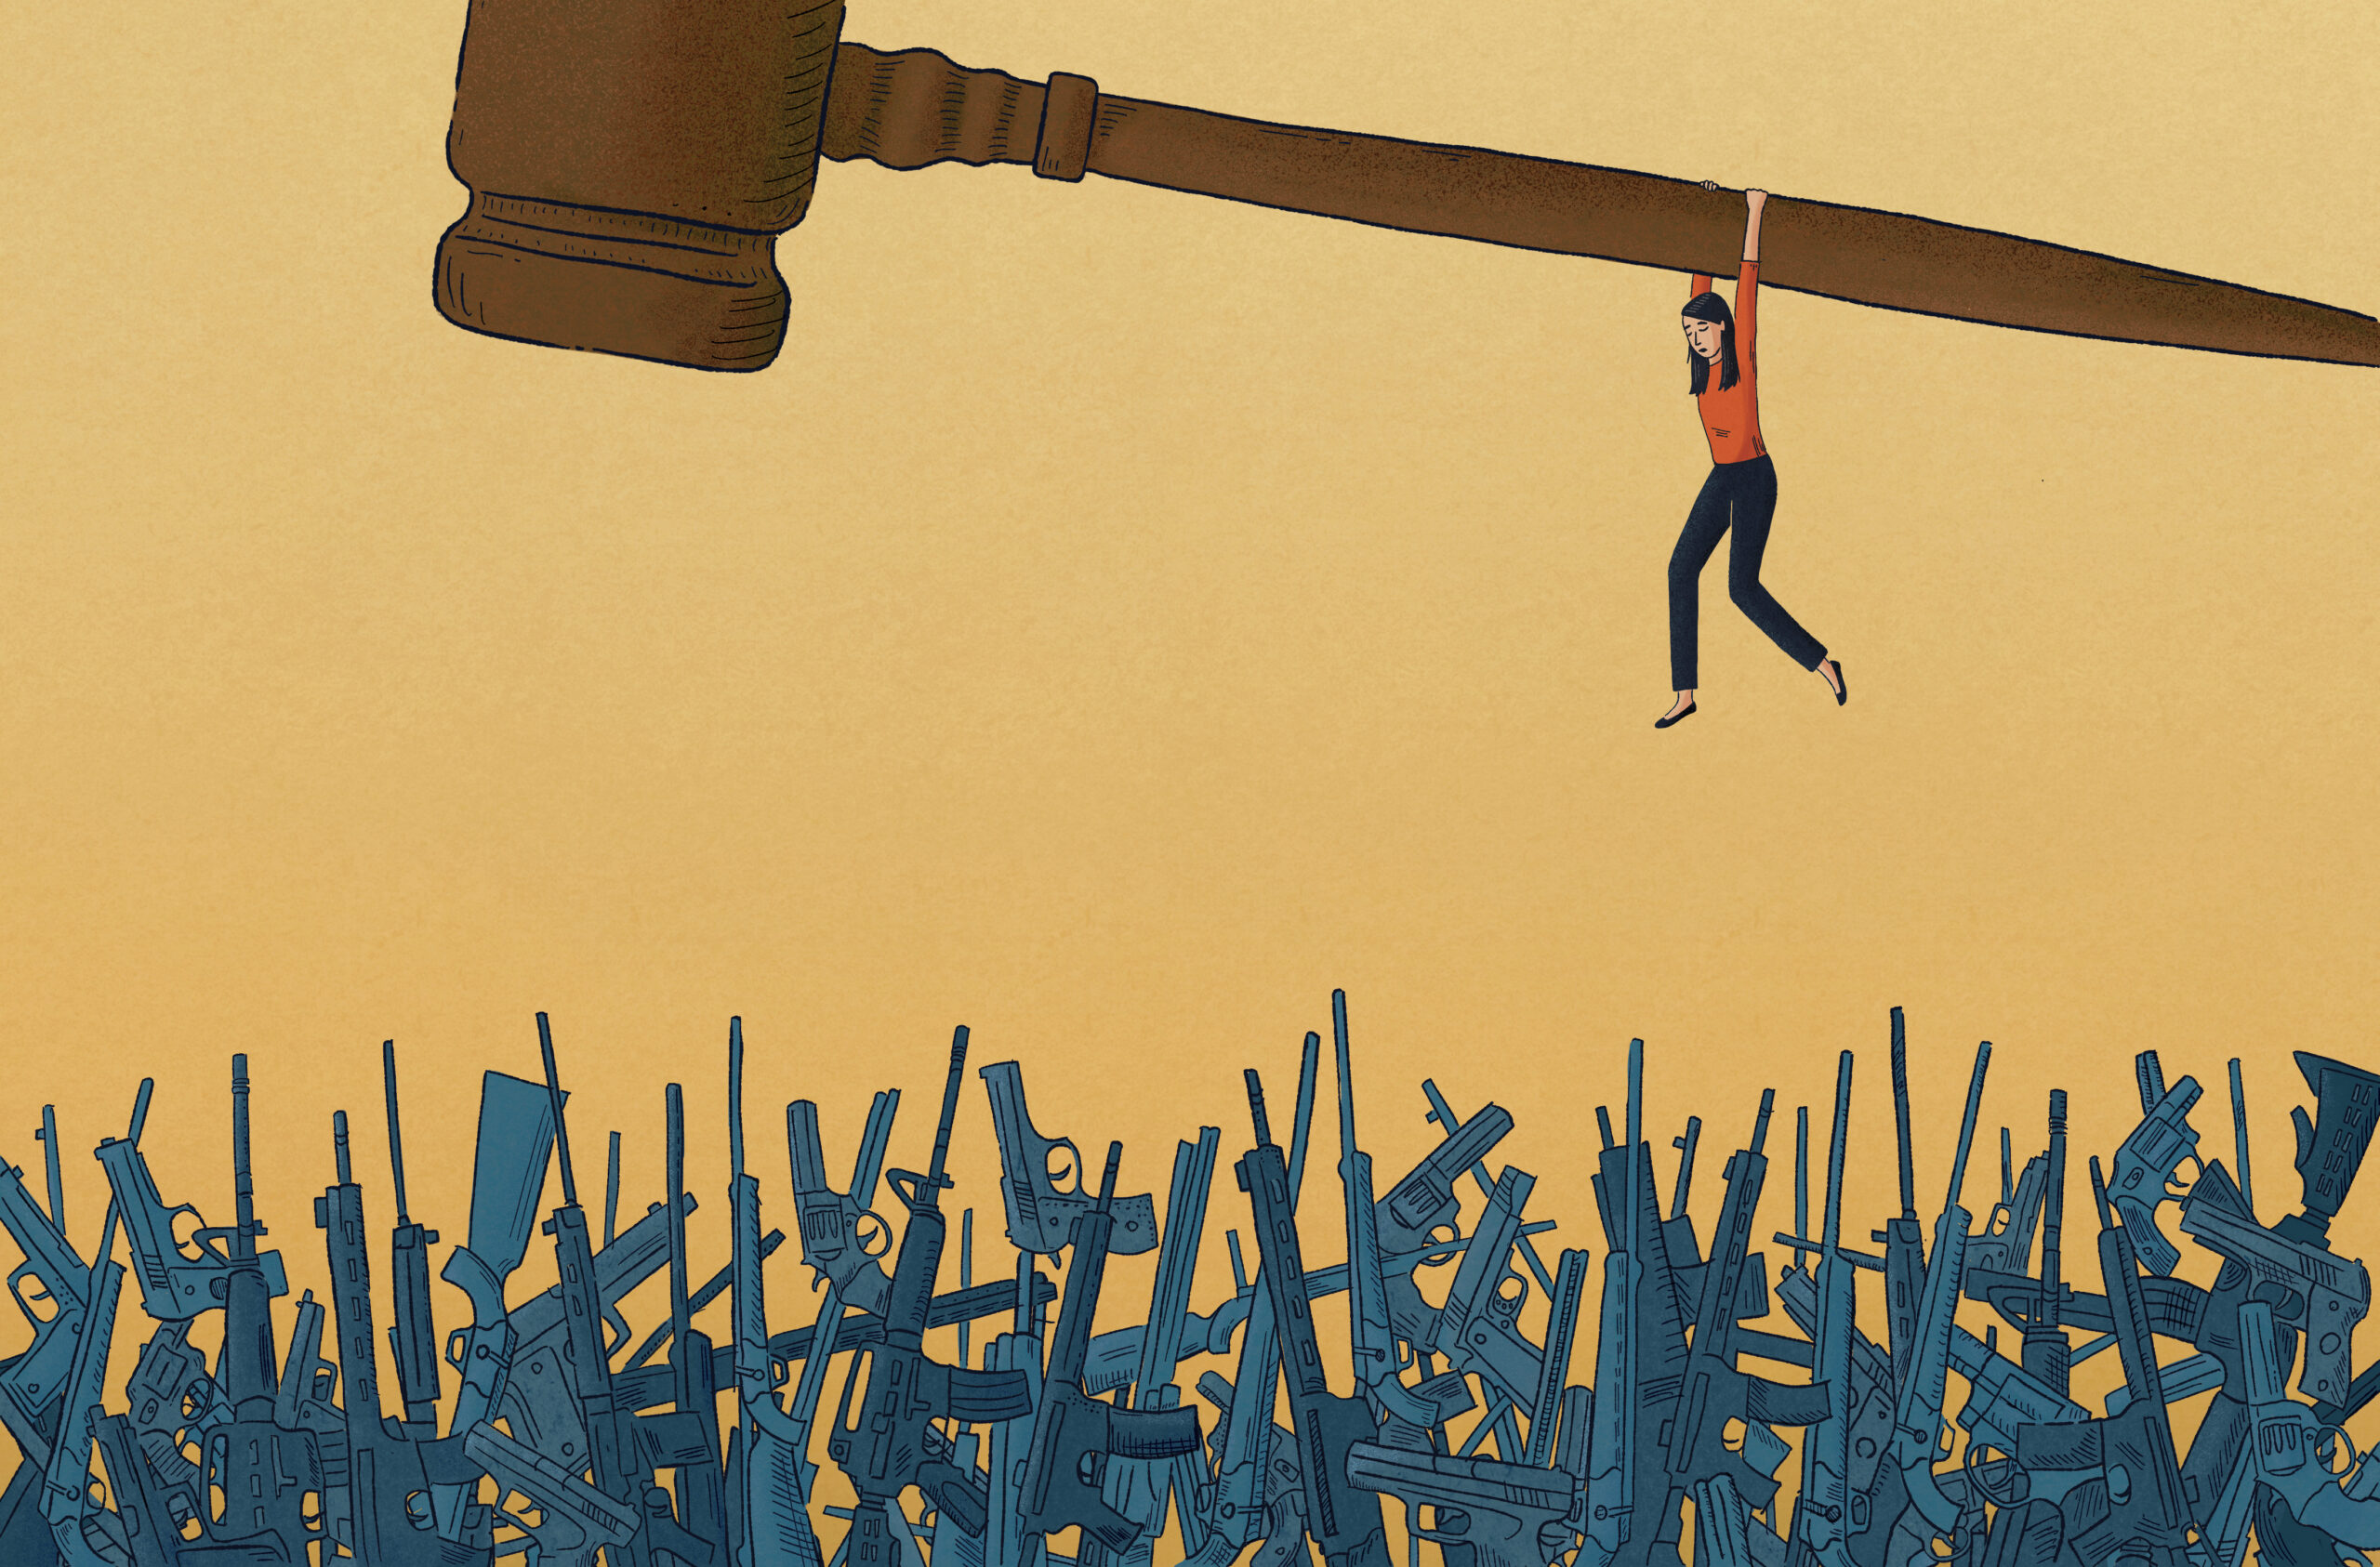 An illustration of a woman dangling from a judge's gavel as she perilously hangs over a field of guns and rifles aimed upwards at her ominously.